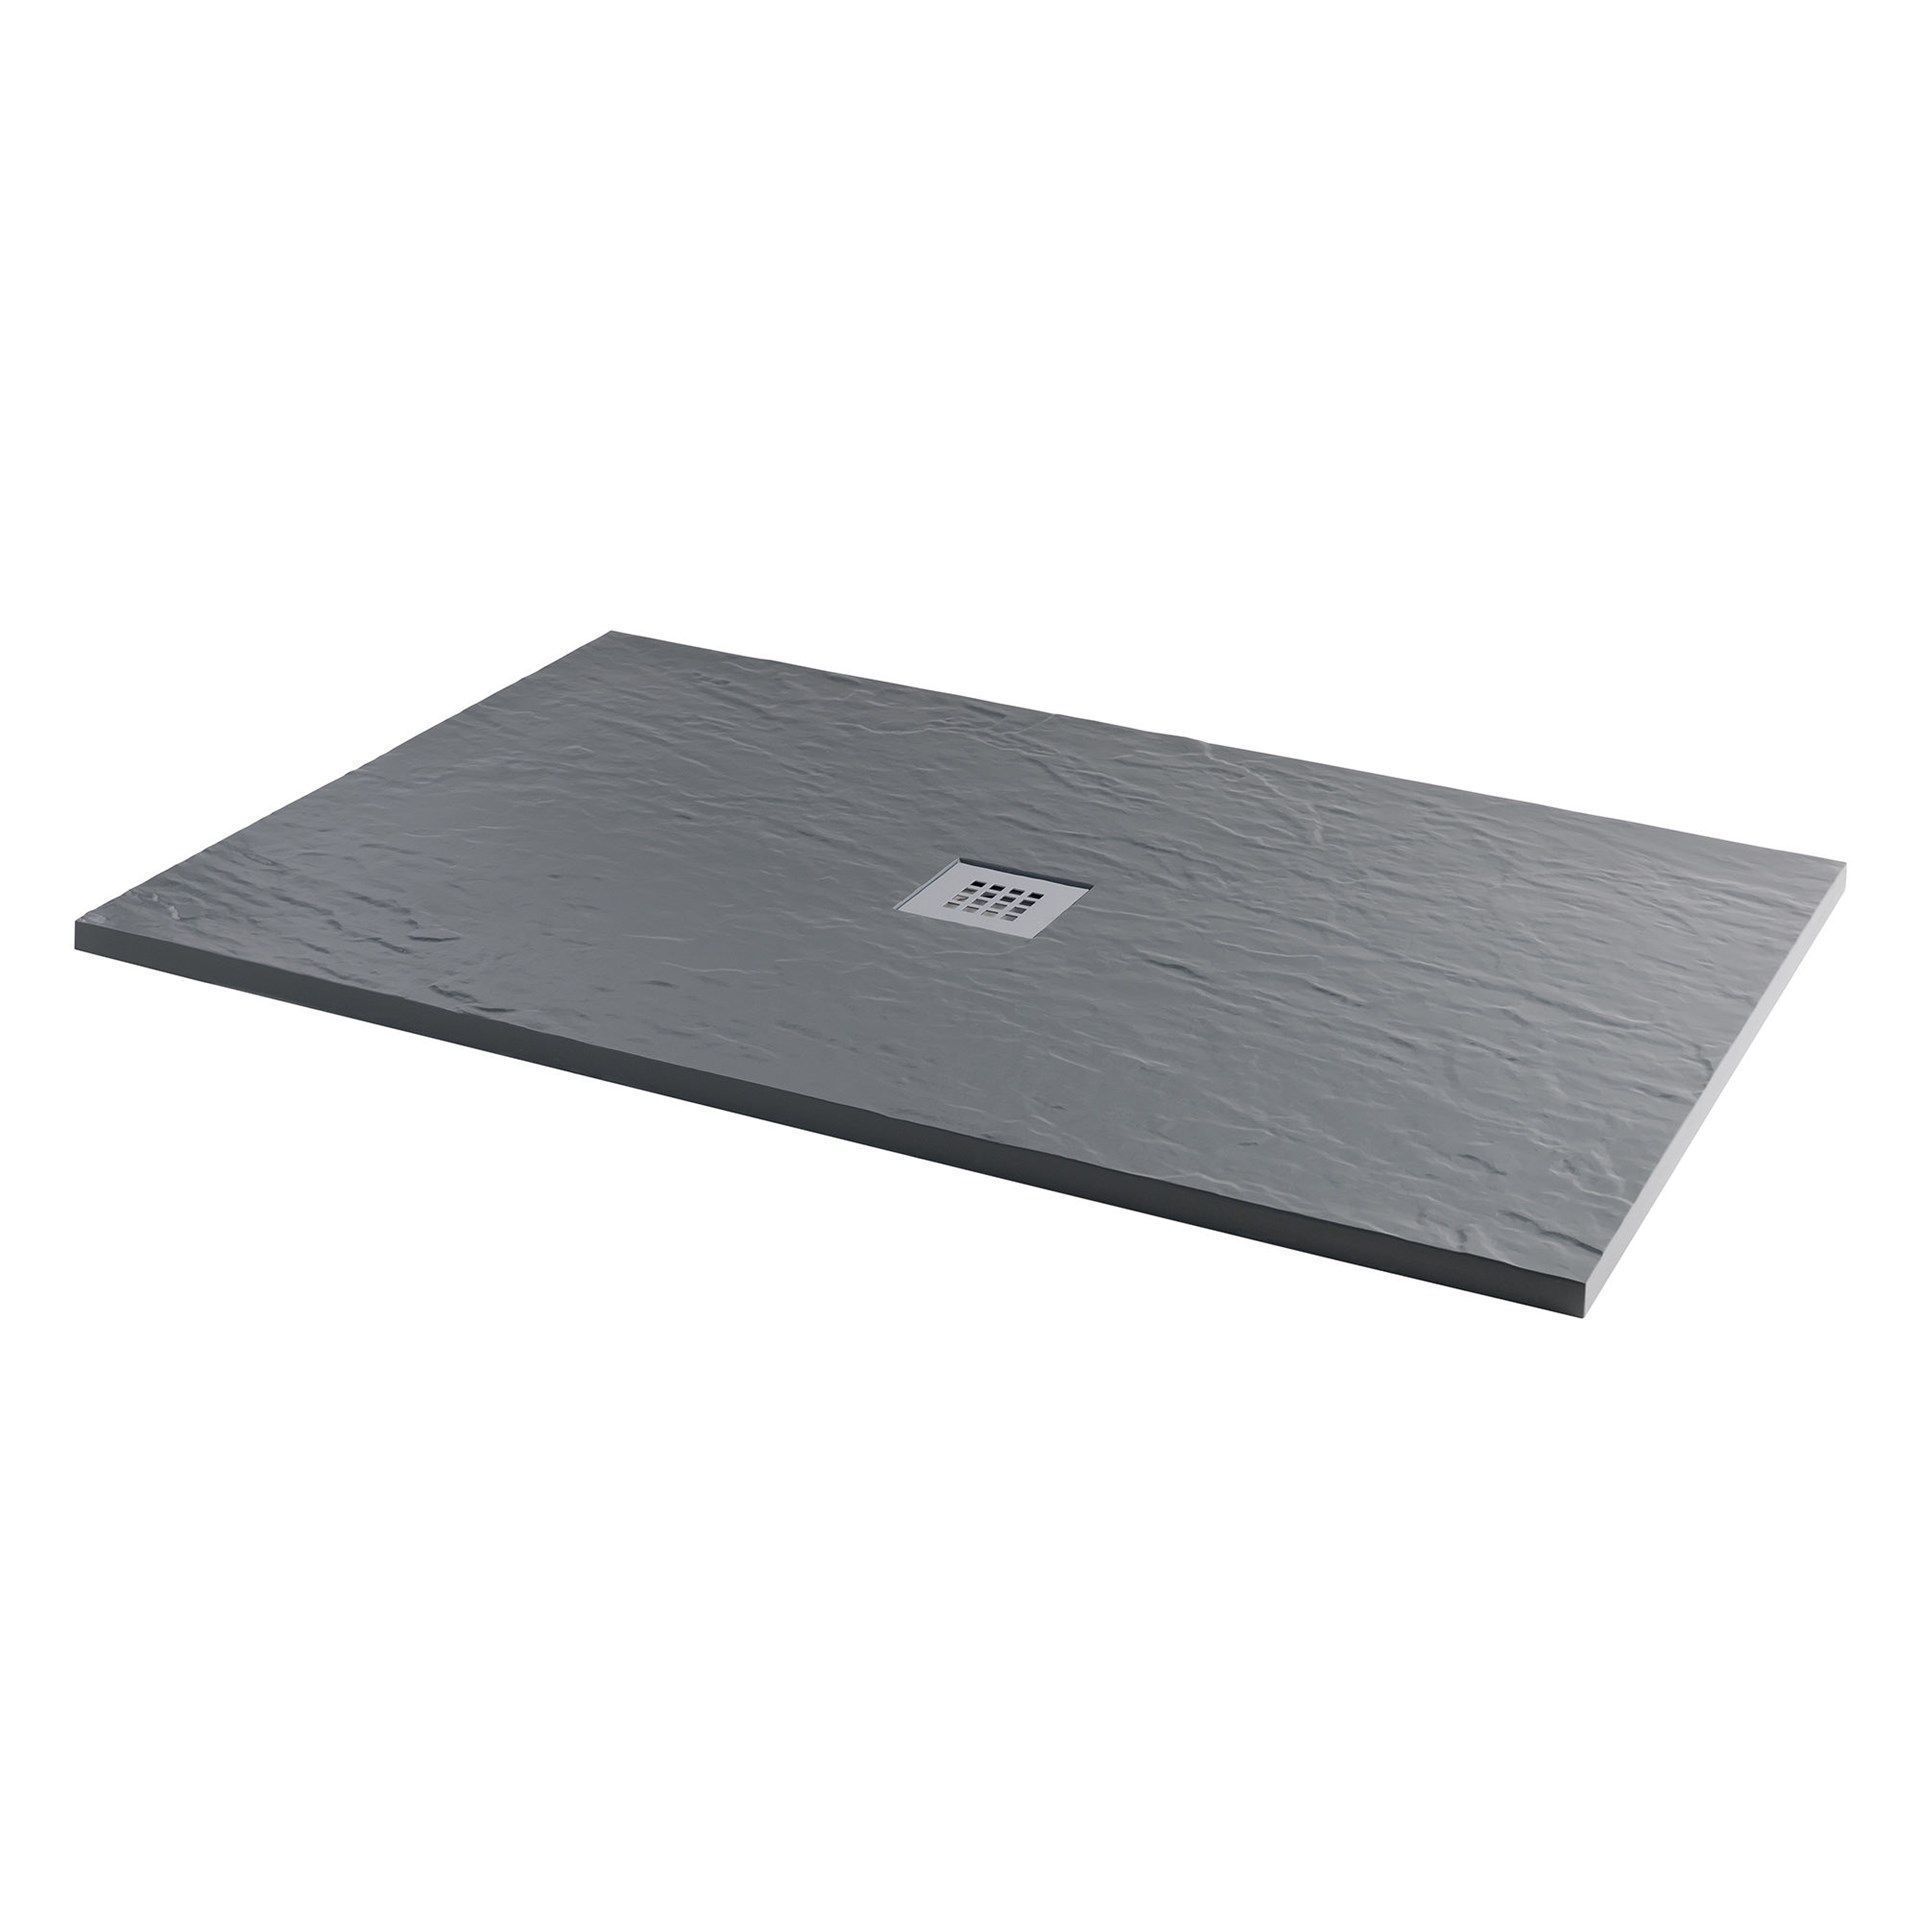 New 1000x800mm Rectangular Slate Effect Shower Tray In Grey. Manufactured In The Uk ...   New - Image 2 of 2